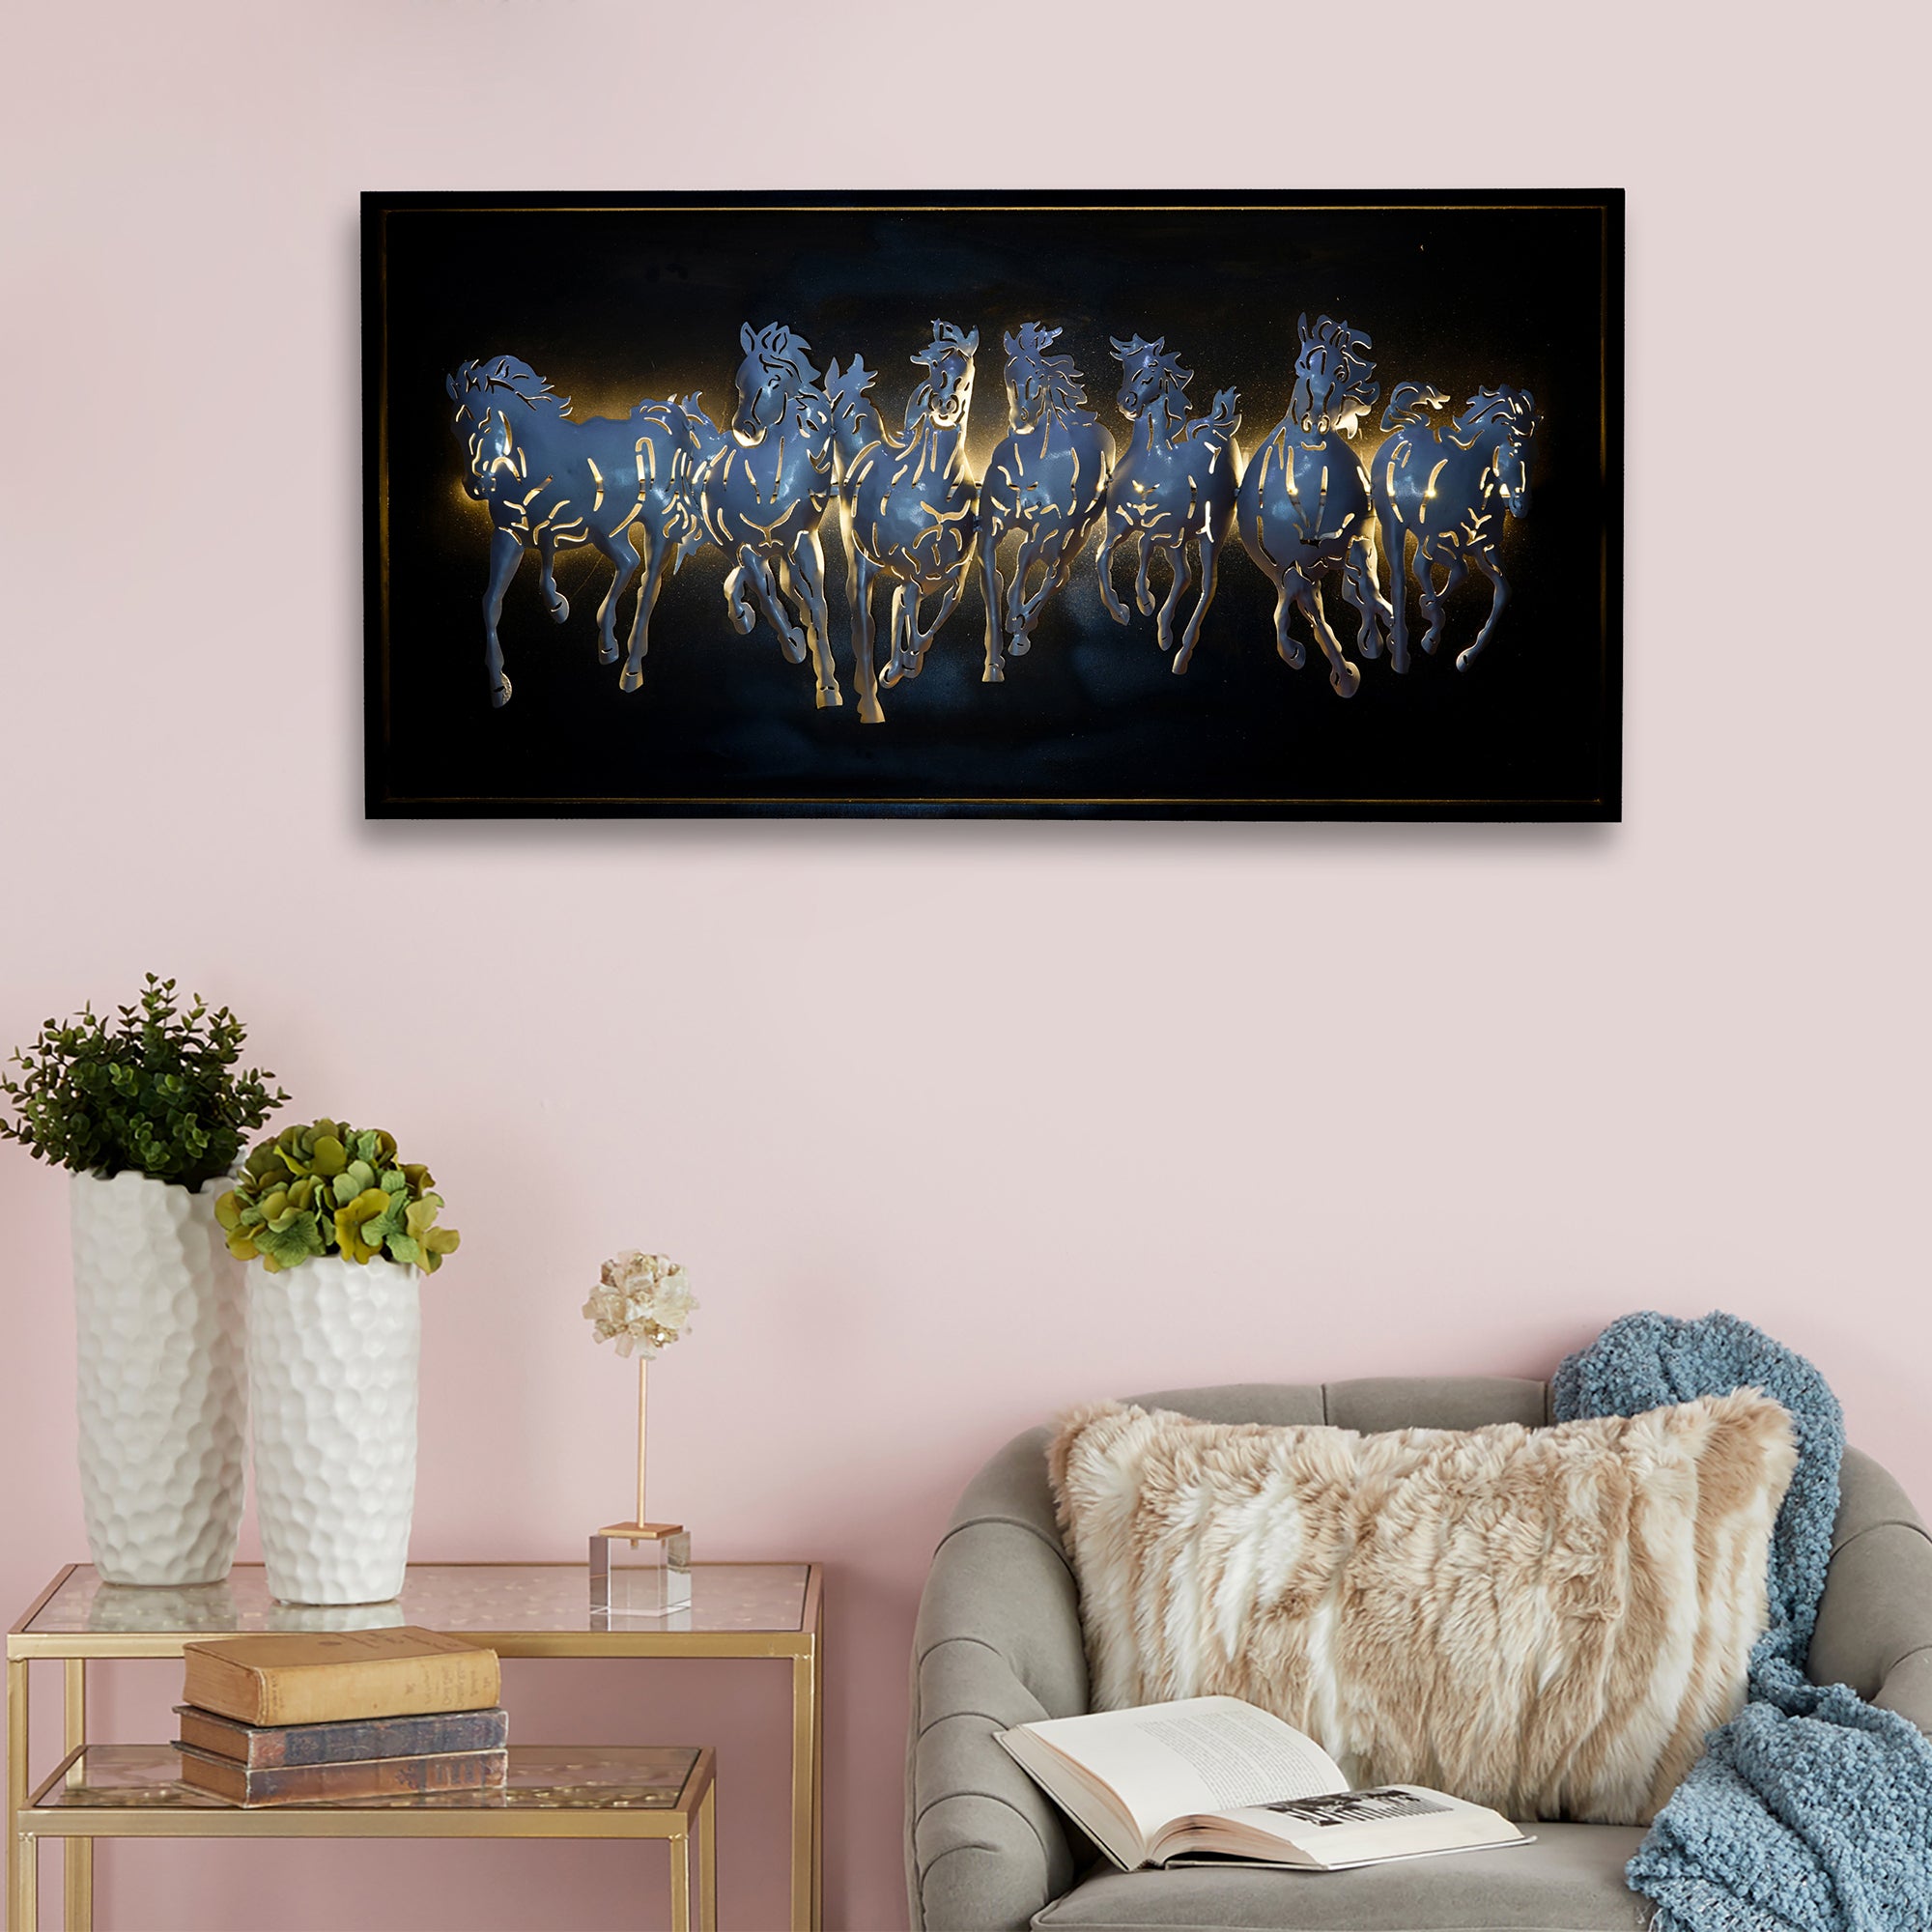 Black and Silver 7 Running Horses empanalled in Wooden Frame Handcrafted Metal Wall Hanging with Background LED's 1